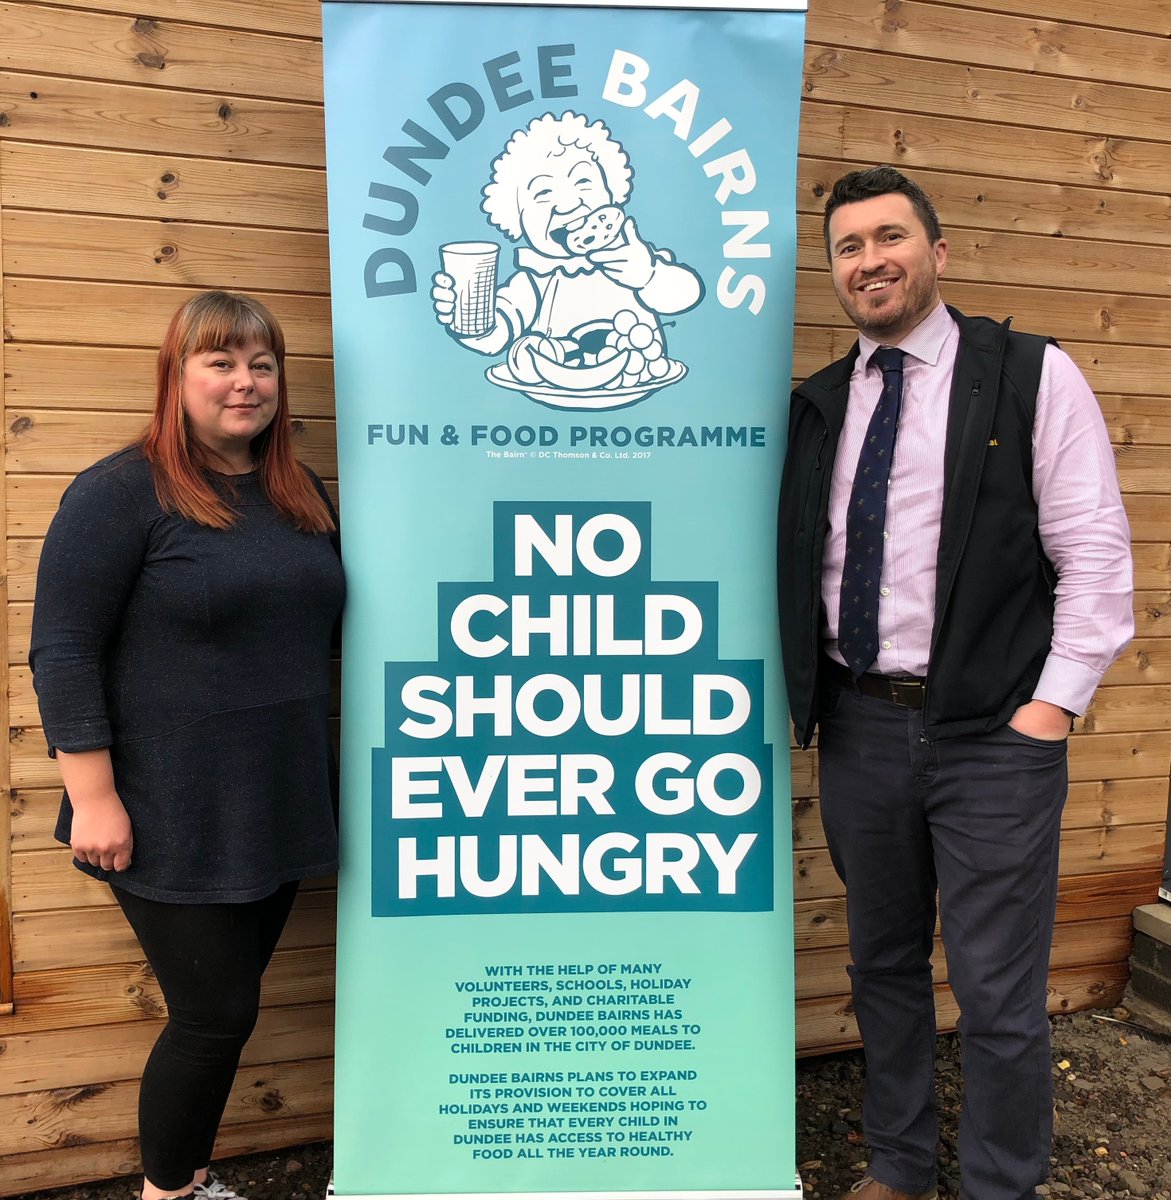 We were proud to nominate @DundeeBairns to receive £6,379 from the @nfum Agency Giving Fund. Genna from DB updated us on their community projects and the incredible 37,000 meals served to children across #Dundee during the school holidays - this had doubled from last year.